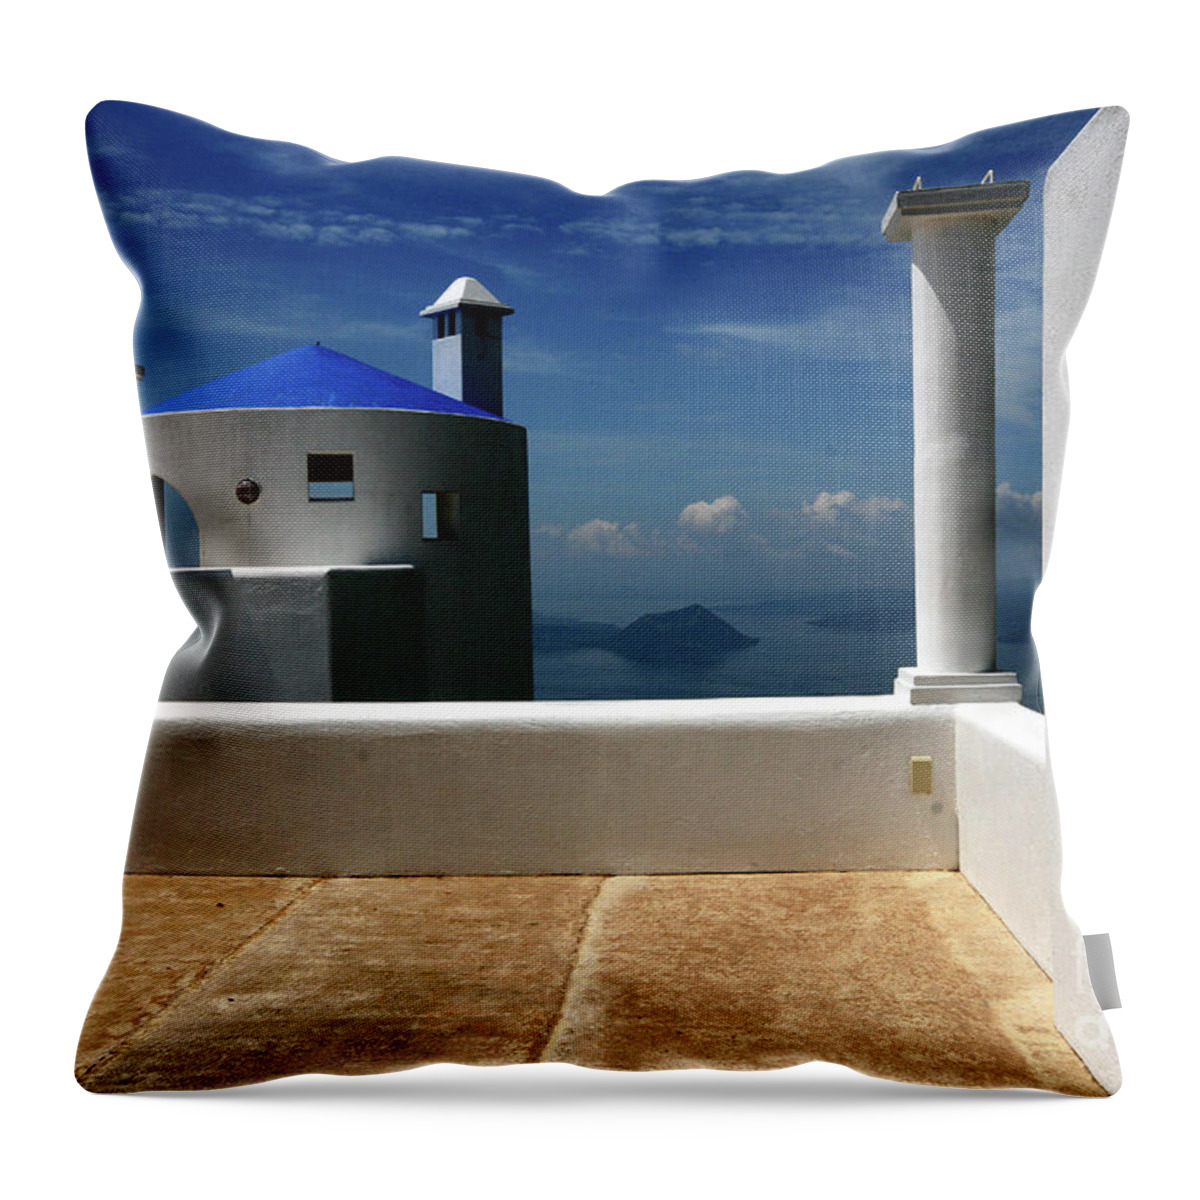  Throw Pillow featuring the digital art Tagaytay by Darcy Dietrich